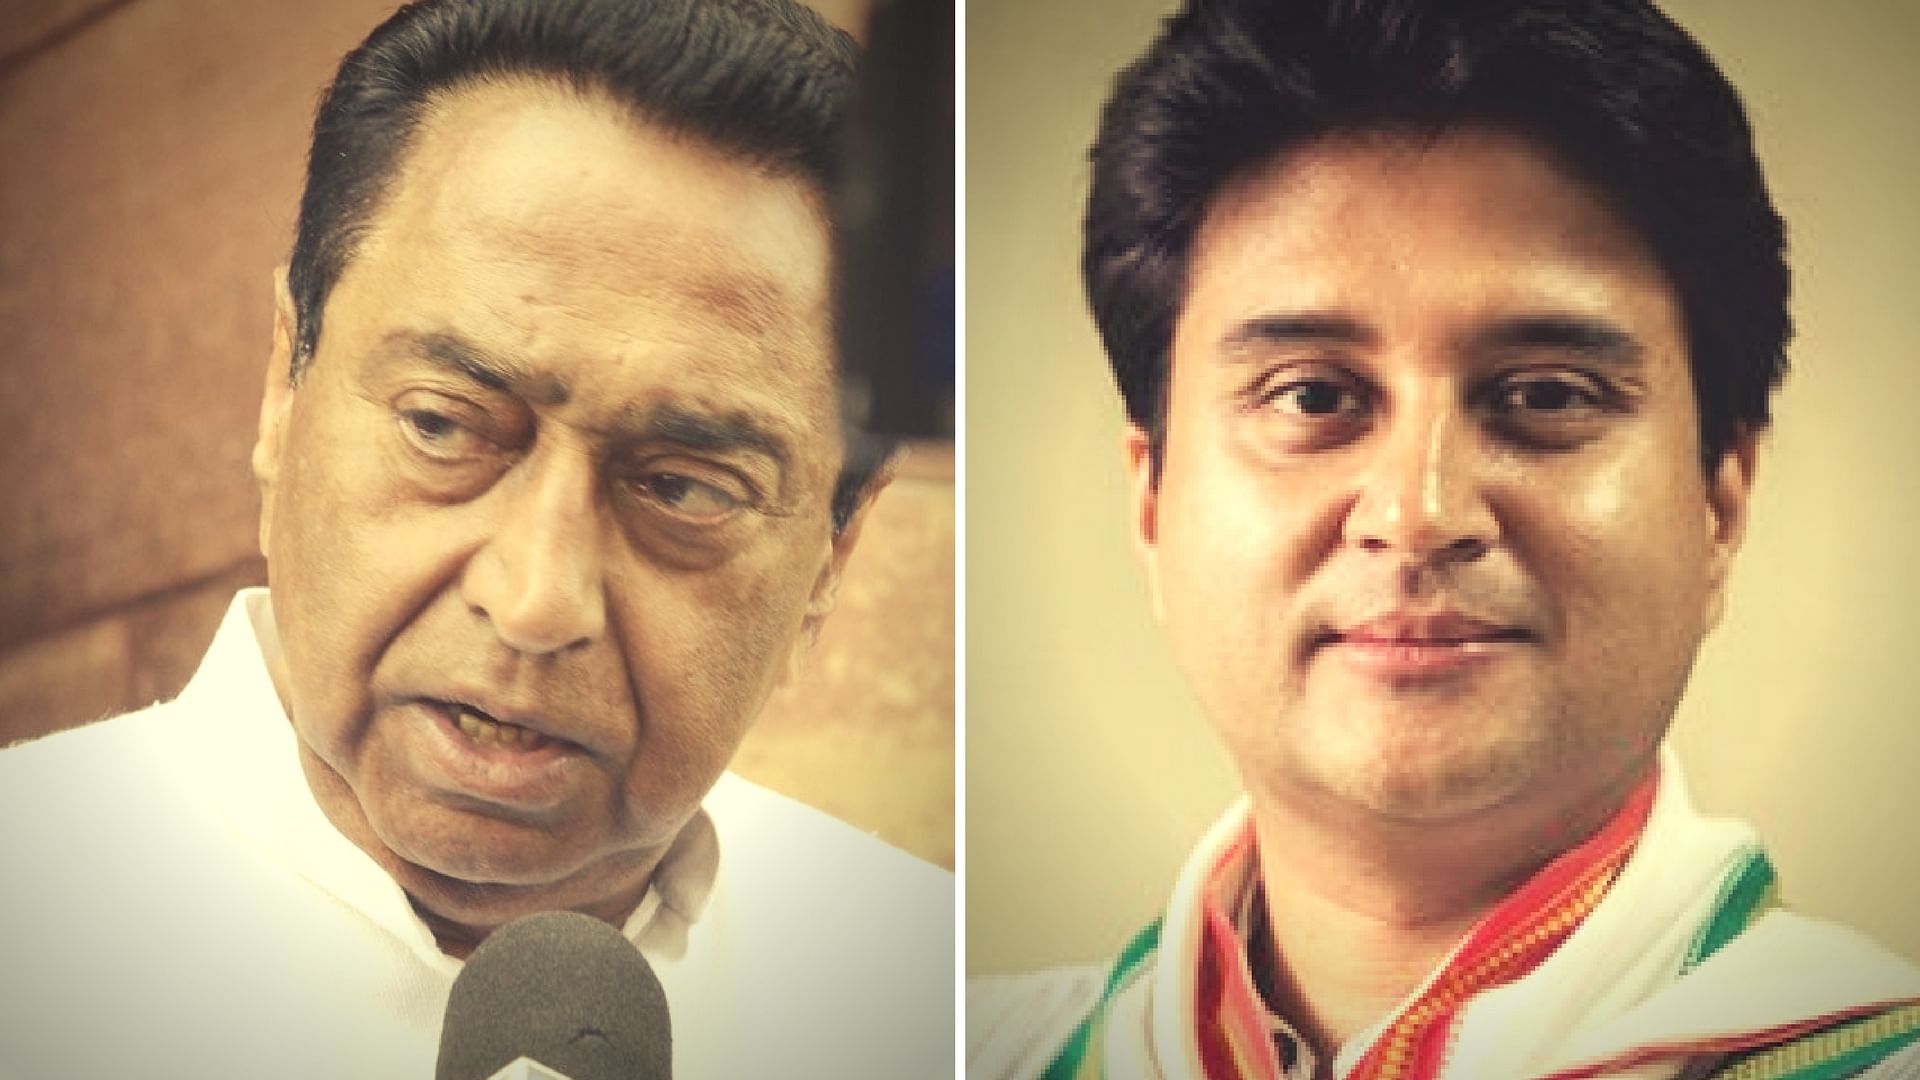 Veteran Congress leader Kamal Nath looks set to take over as chief minister of Madhya Pradesh though a formal decision has not yet been made.